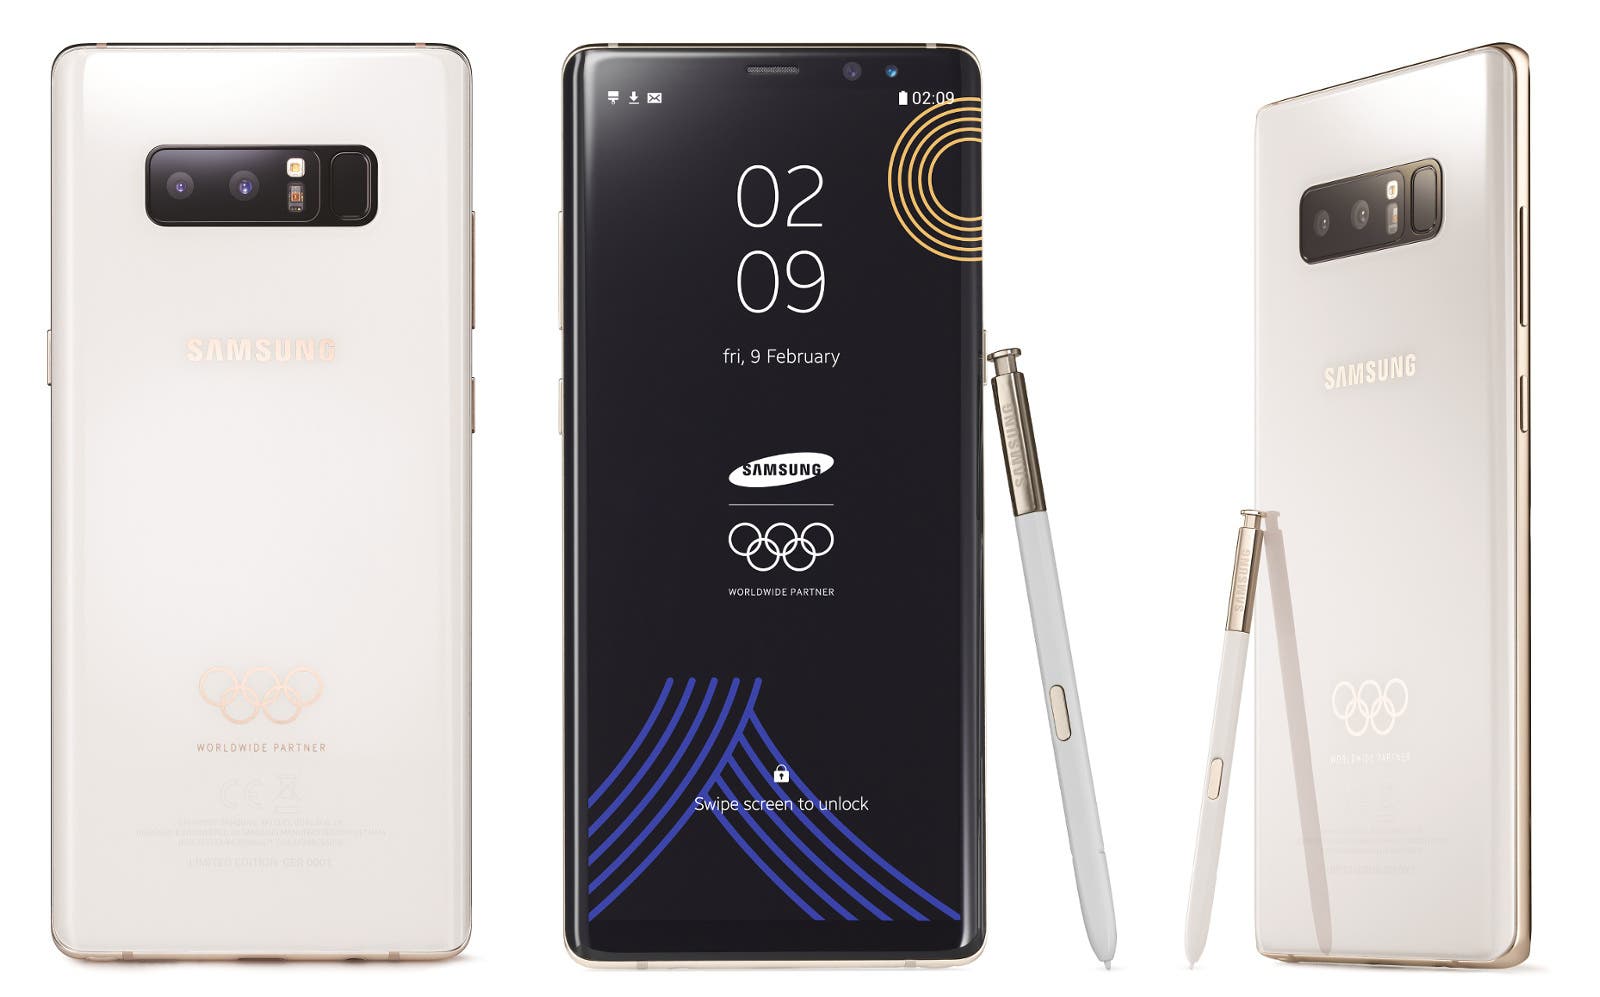 Galaxy Note 8 PyeongChang 2018 Olympic Games Limited Edition